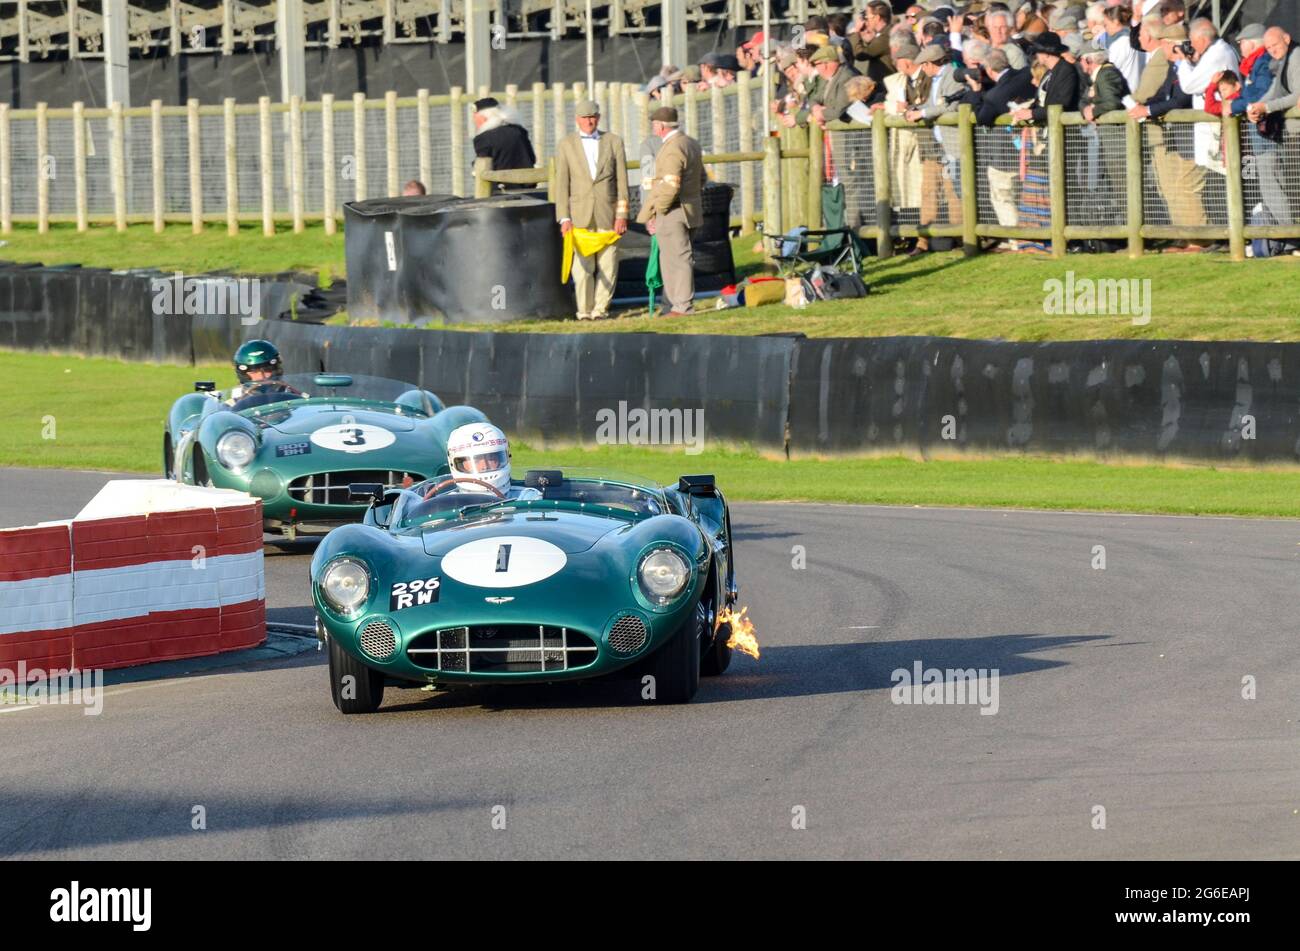 Aston Martin DBR1/1 classic sports car, vintage racing car competing in the Sussex Trophy at the Goodwood Revival historic event, UK. Exhaust flame Stock Photo